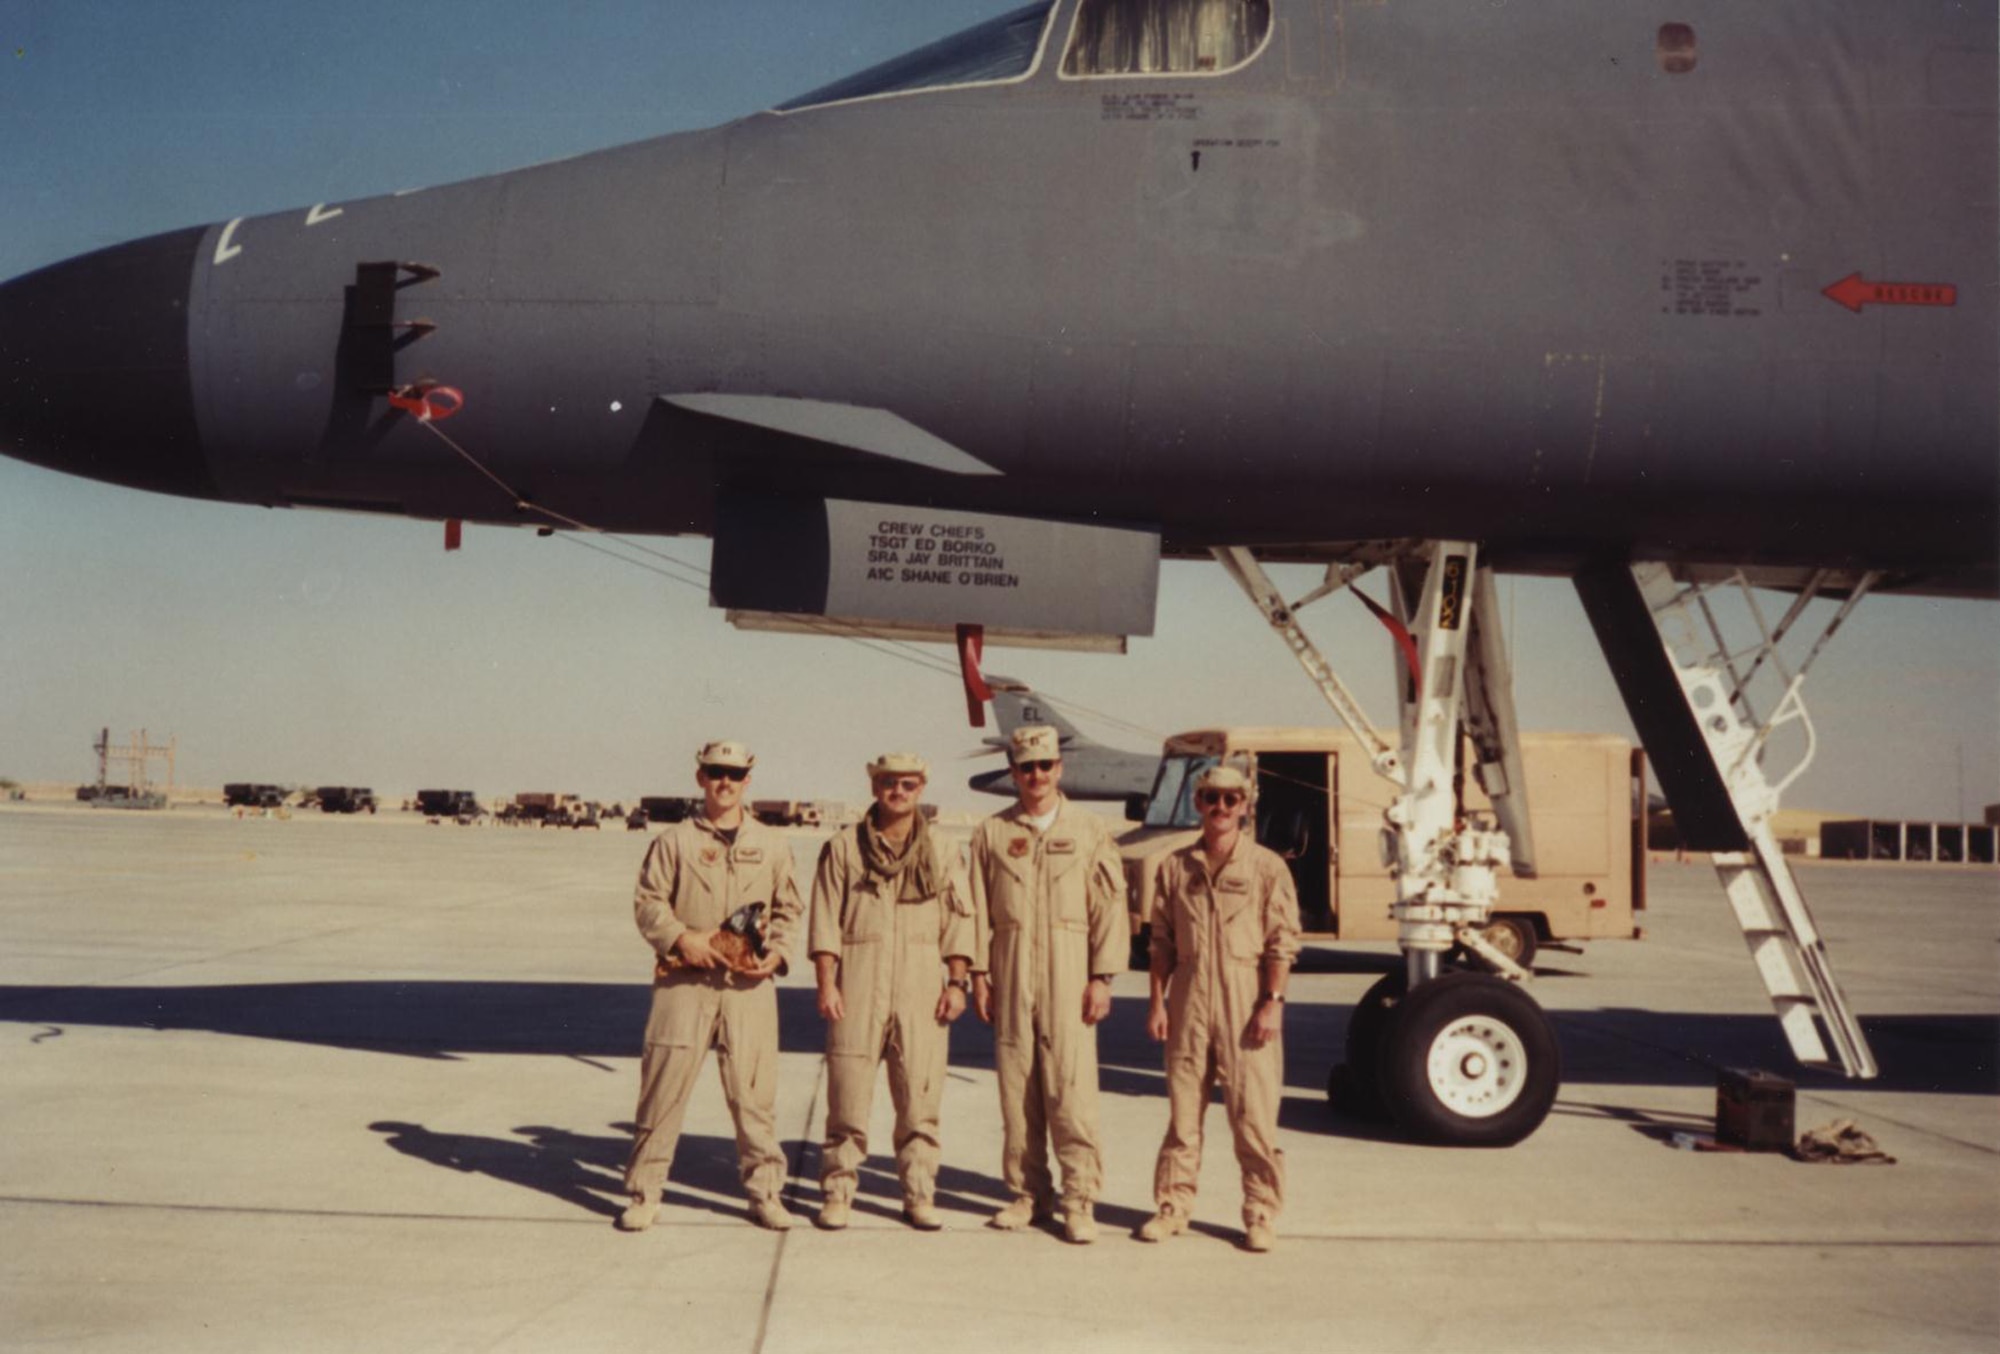 (From left to right) Captains John Martin, Joe Reidy, Jeffrey Taliaferro and Randy Kaufman stand in front of 37th Bomb Squadron aircraft number 86-0102 during Operation Desert Fox on the flightline at Thumrait Air Base, Oman, Dec. 19, 1998.